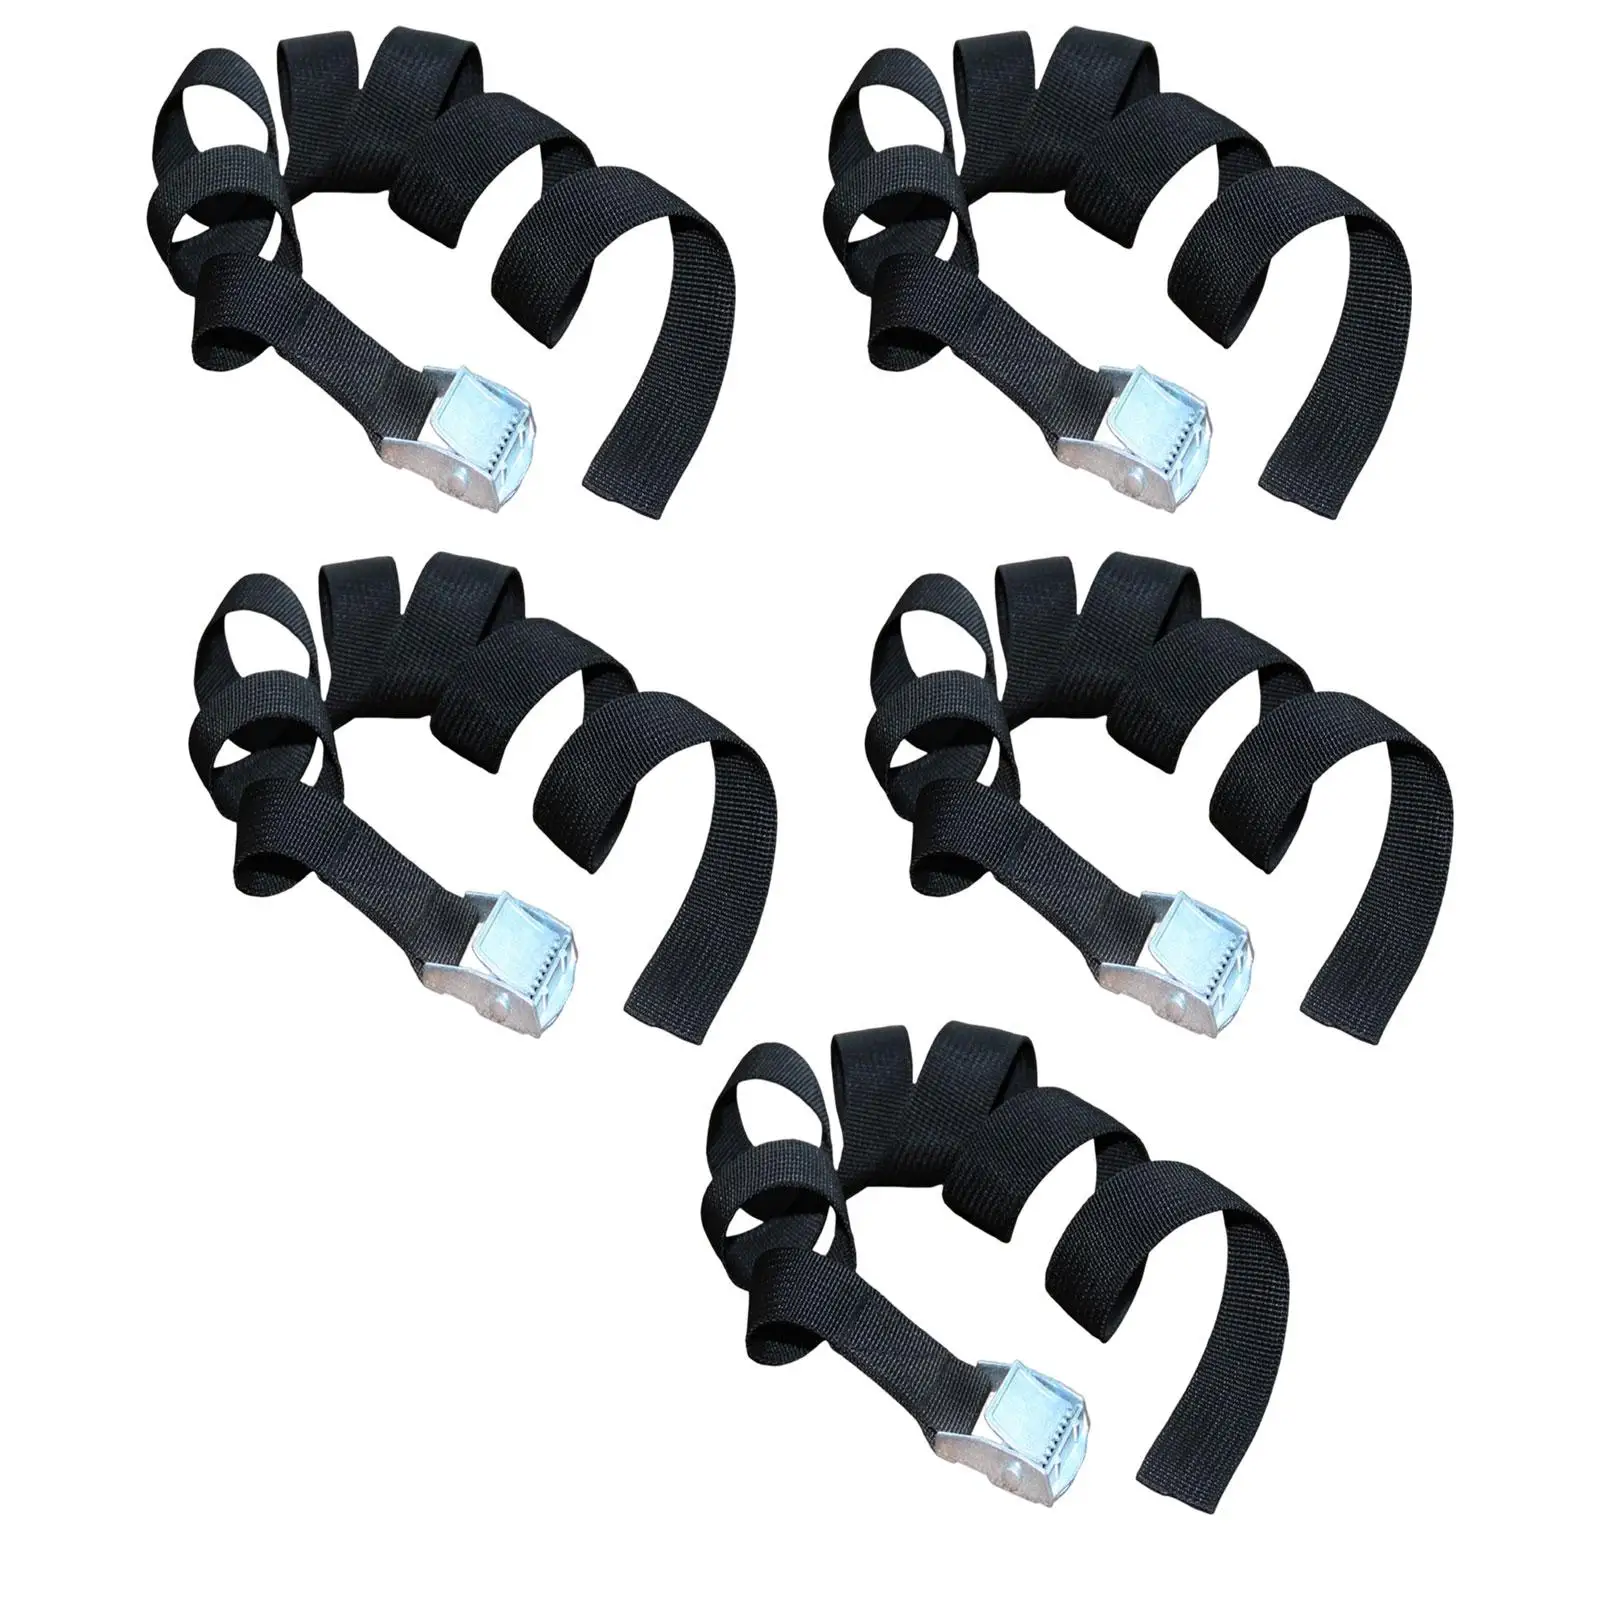 5Pcs Luggage Fixing Straps with Zinc Alloy Lock Buckle for Kayak Fixing